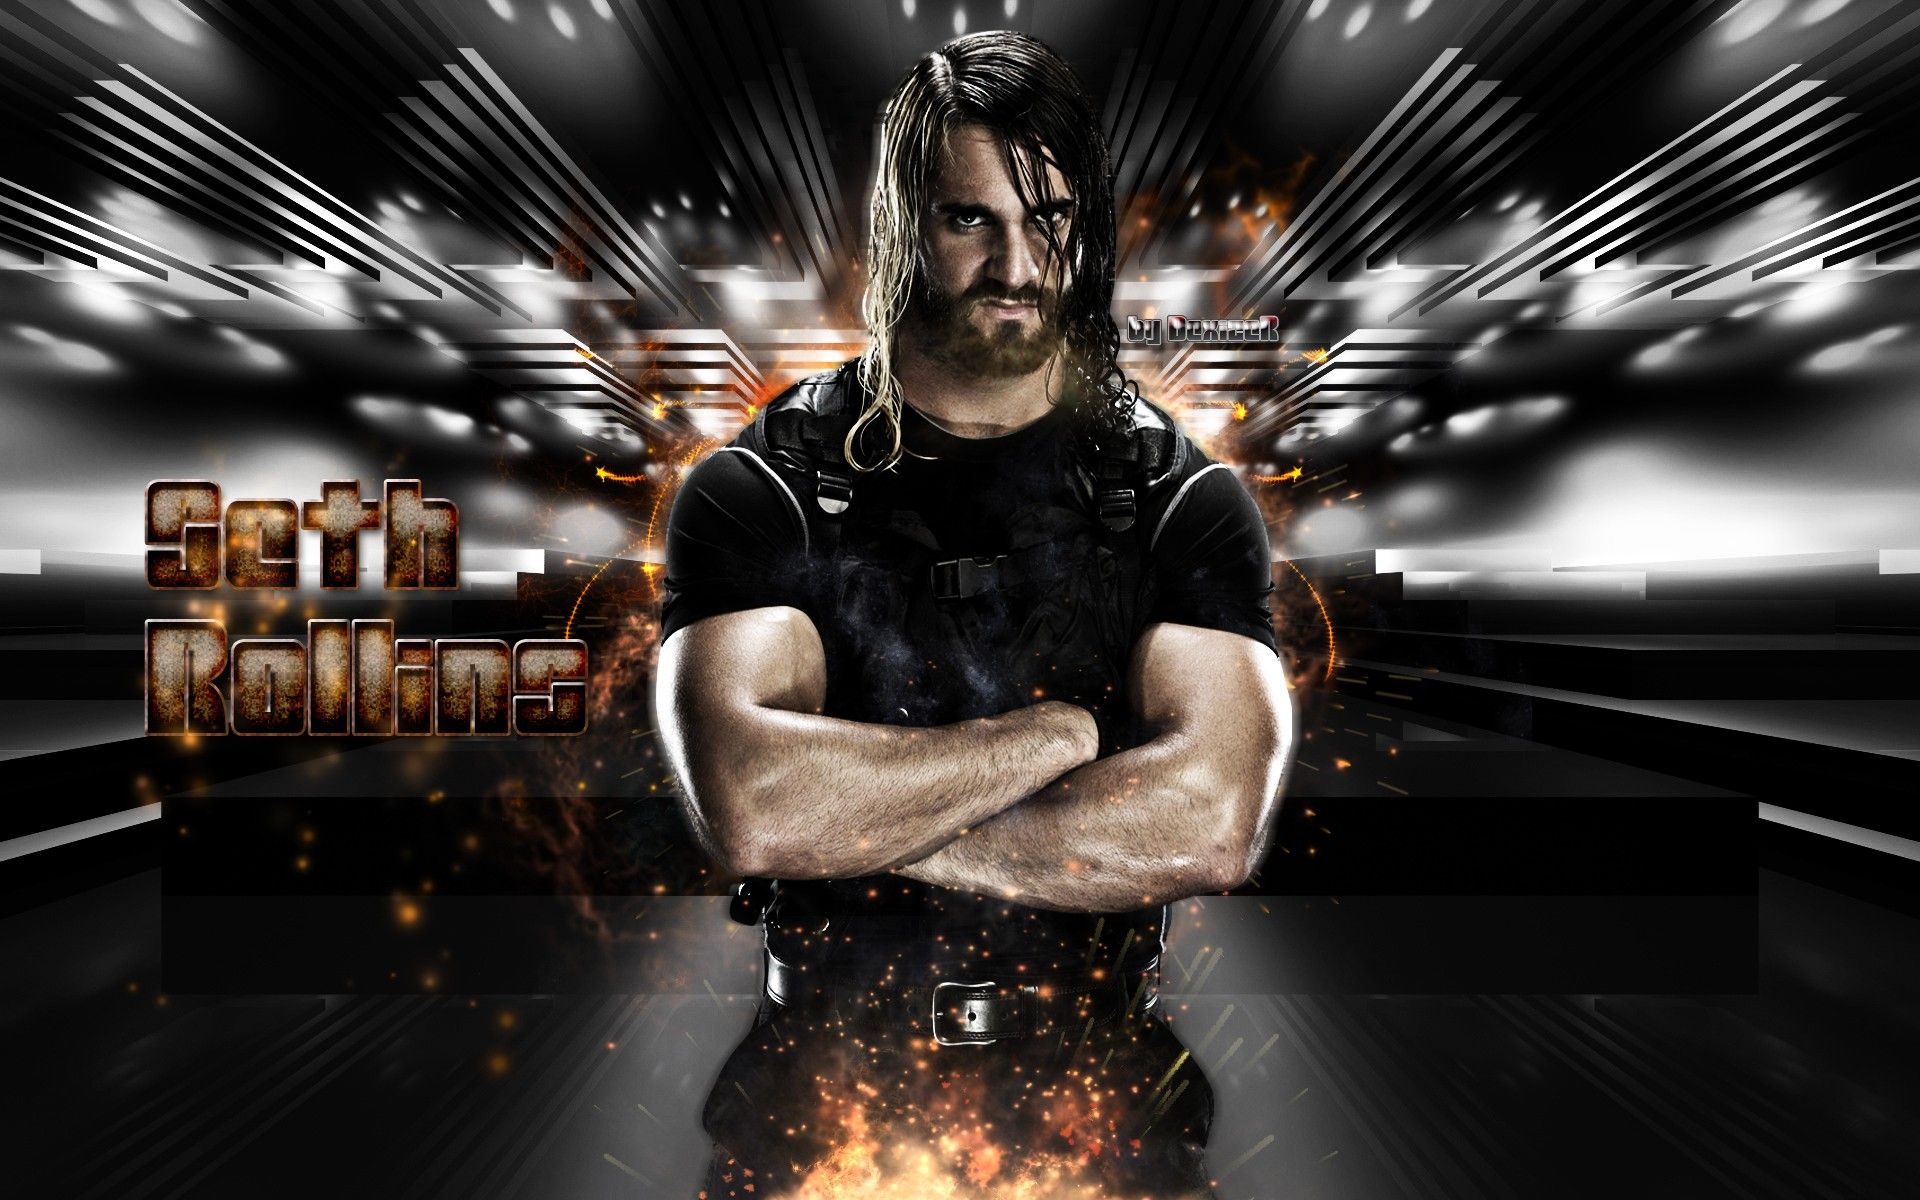 WWE Superstar Seth Rollins Wallpapers - New HD Wallpapers